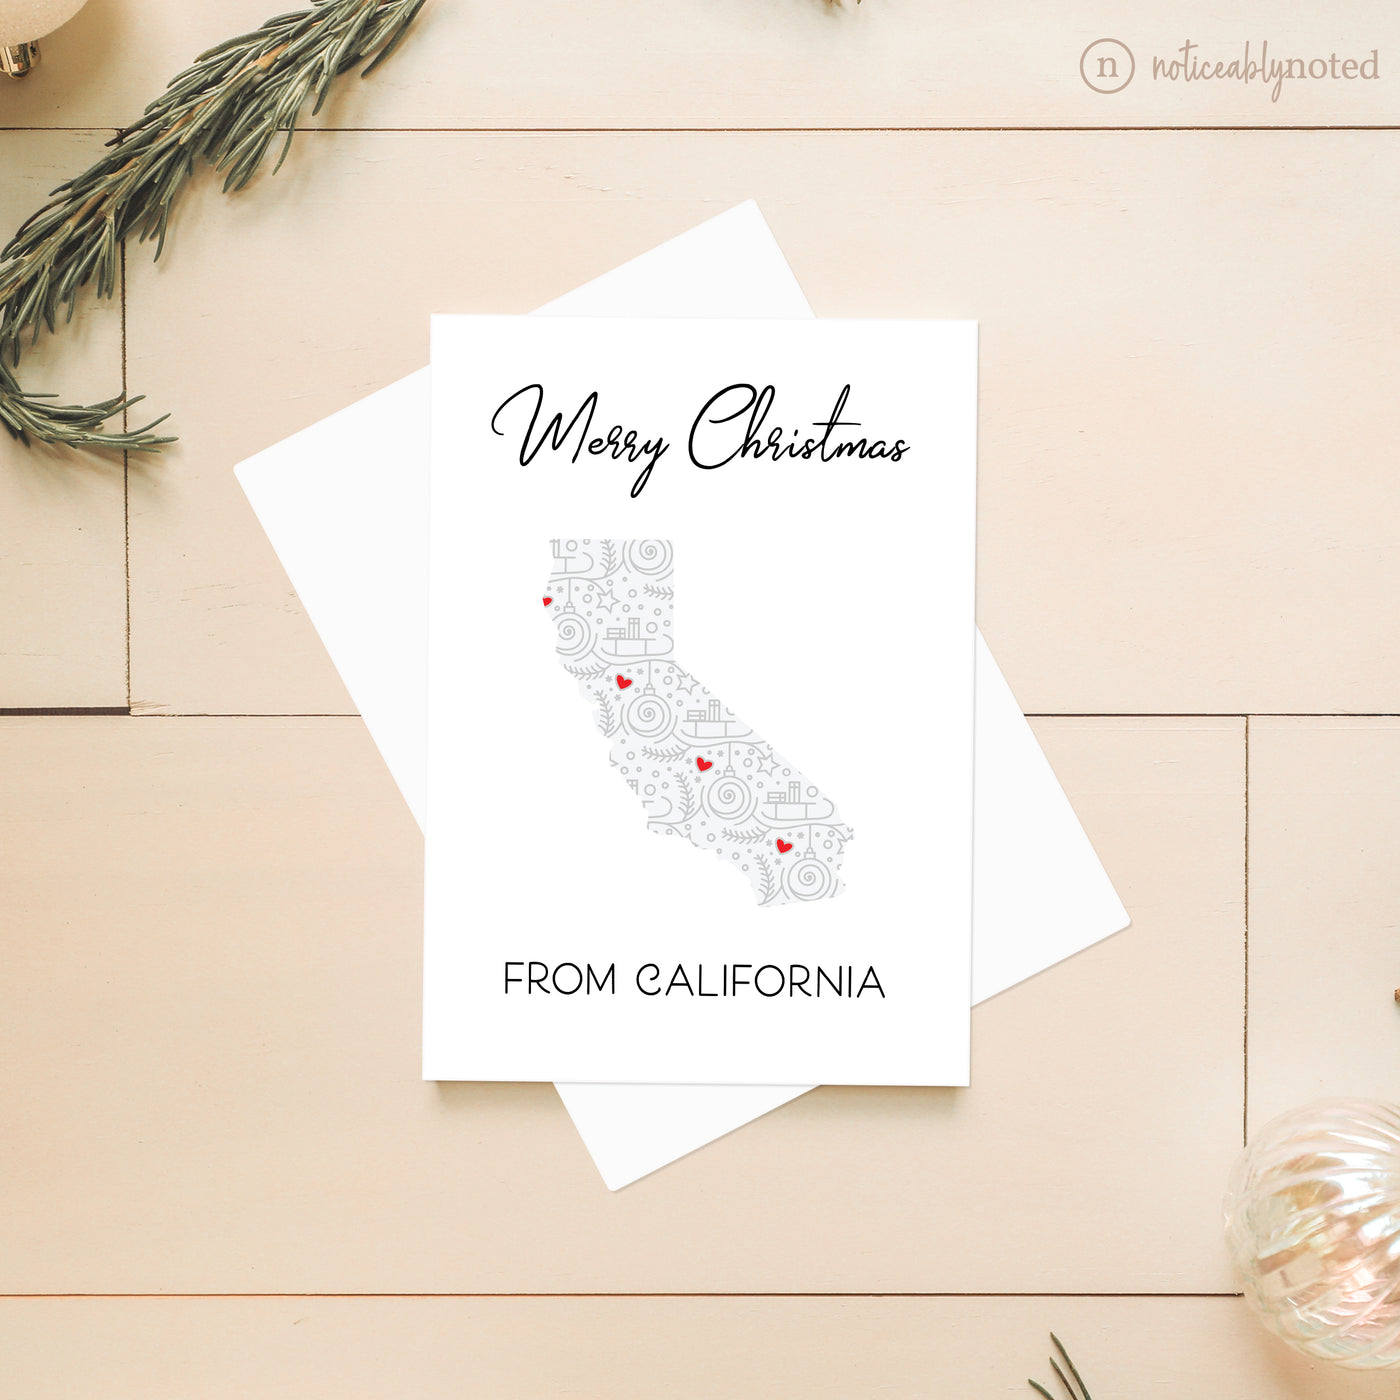 California Christmas Cards | Noticeably Noted